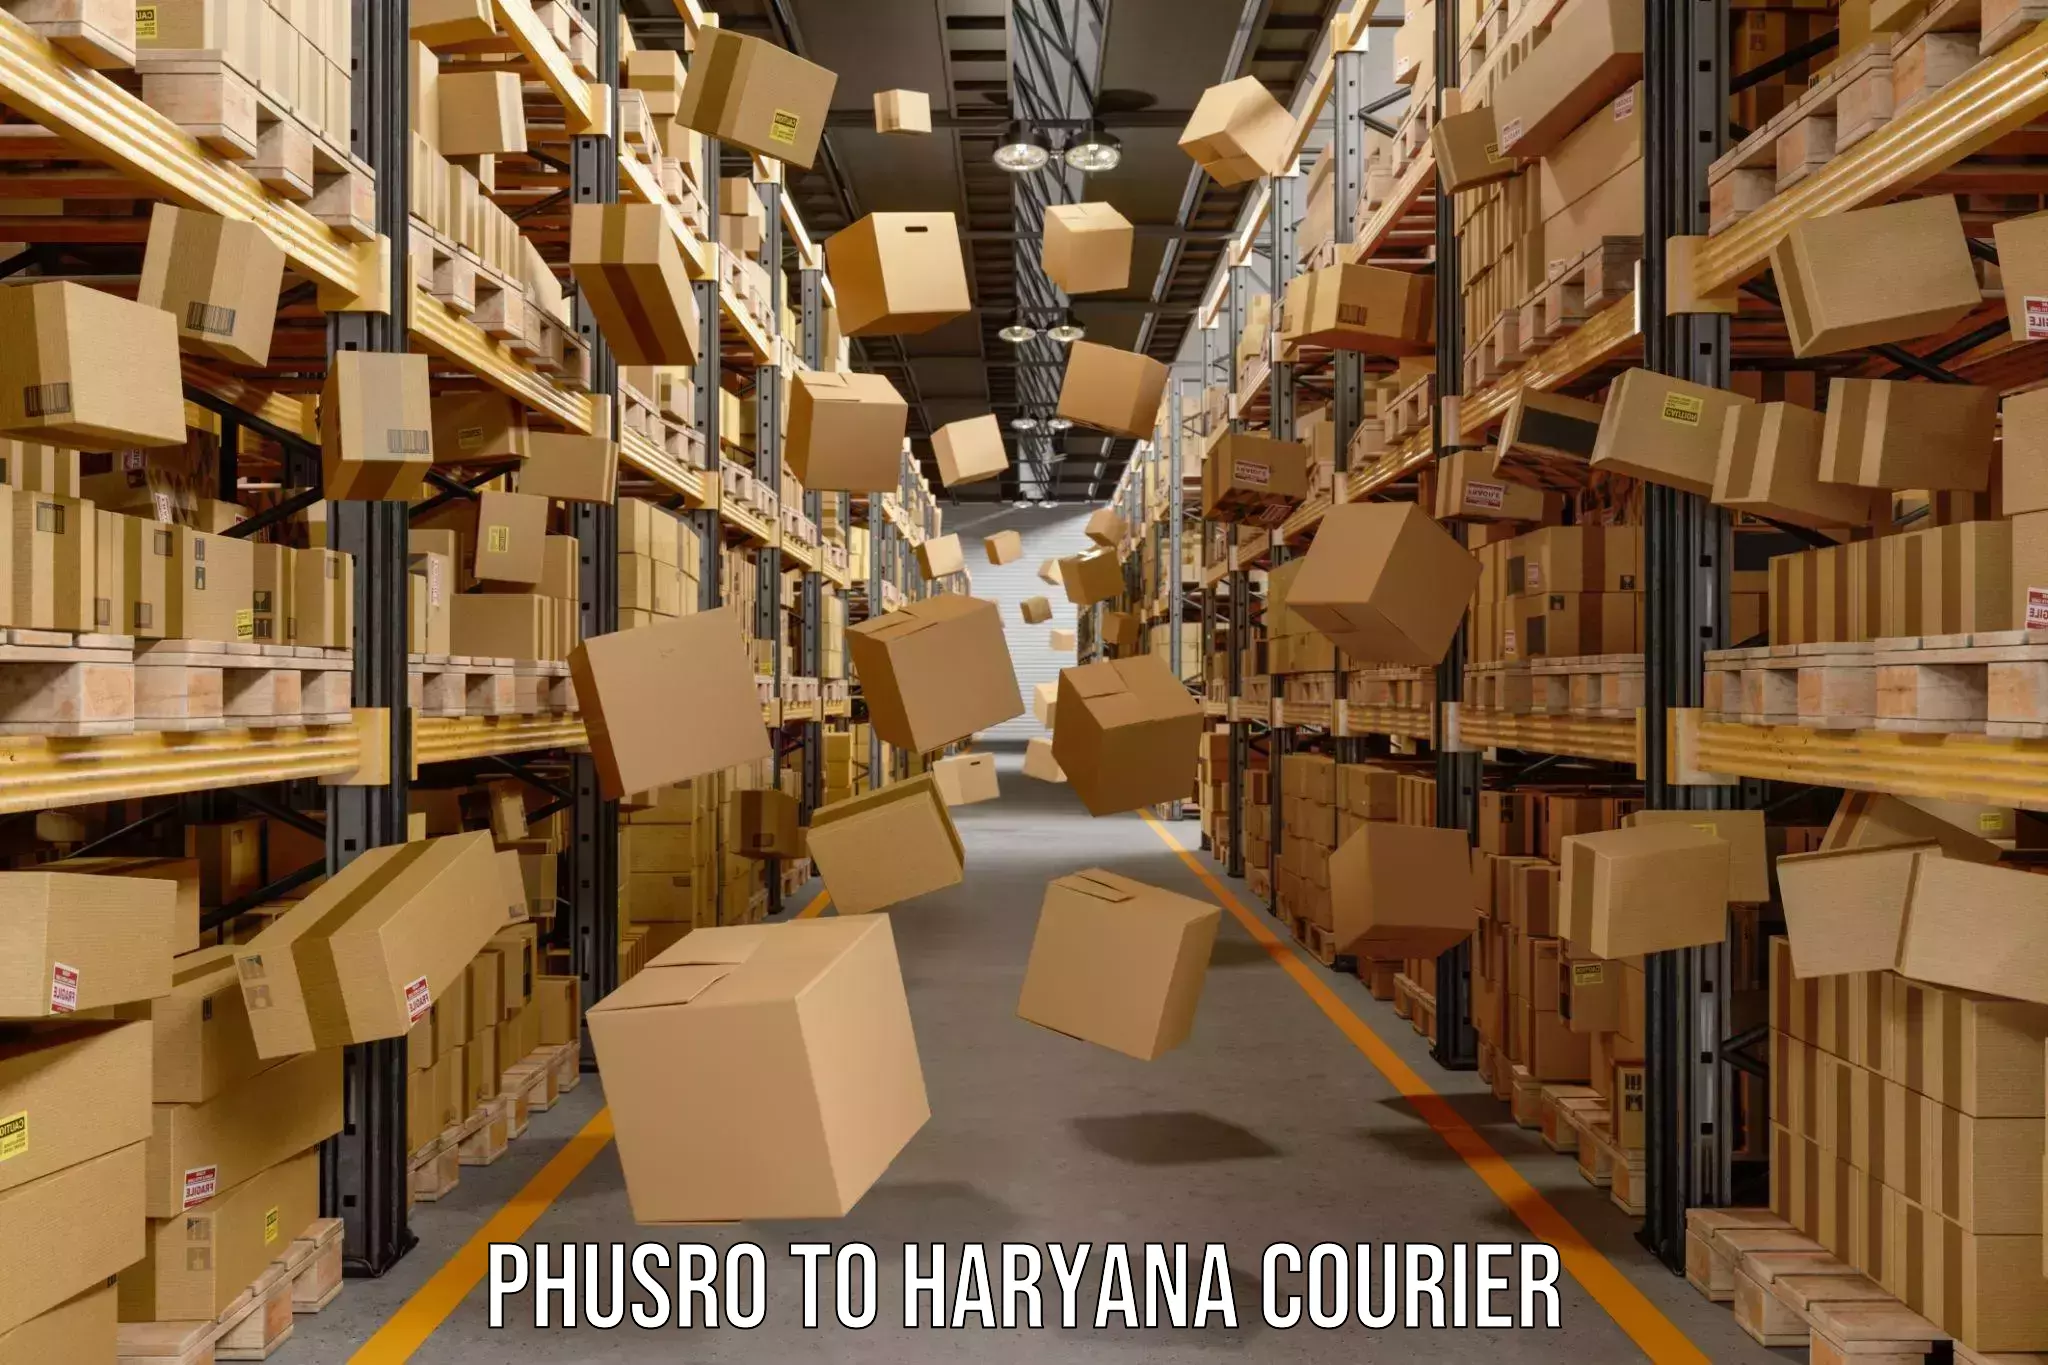 Express delivery capabilities in Phusro to Gurgaon